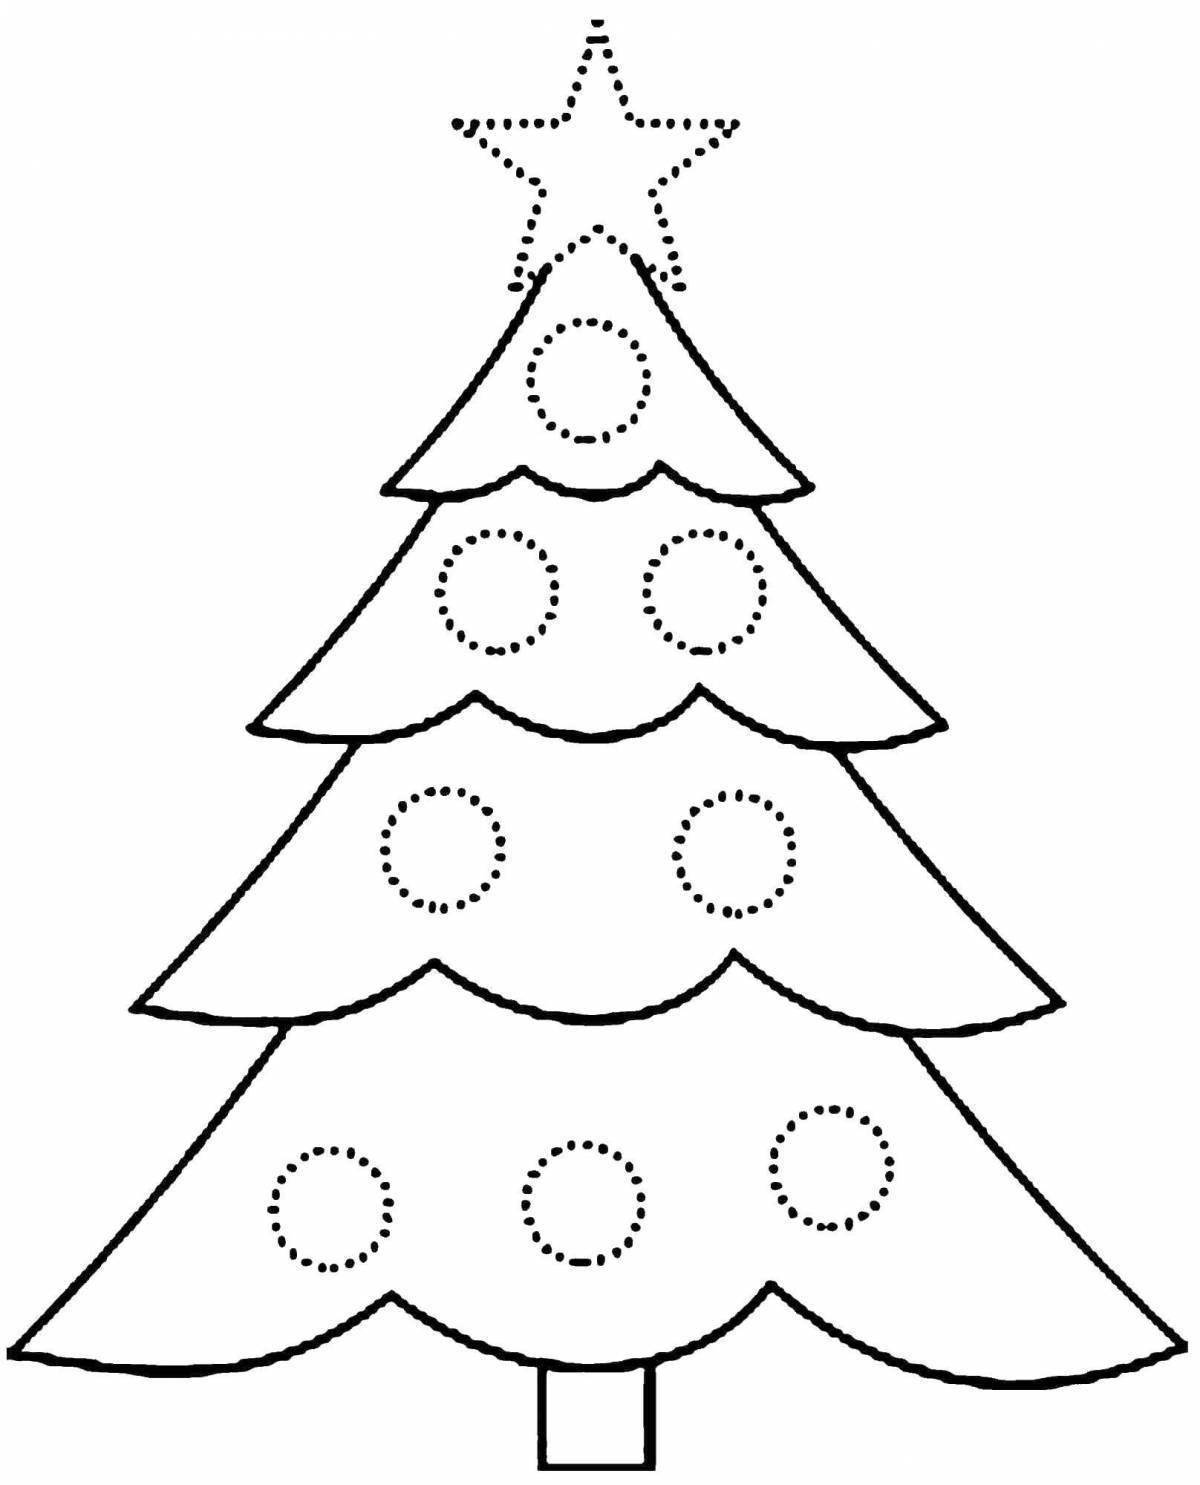 Charming Christmas tree coloring book for kids 5-6 years old